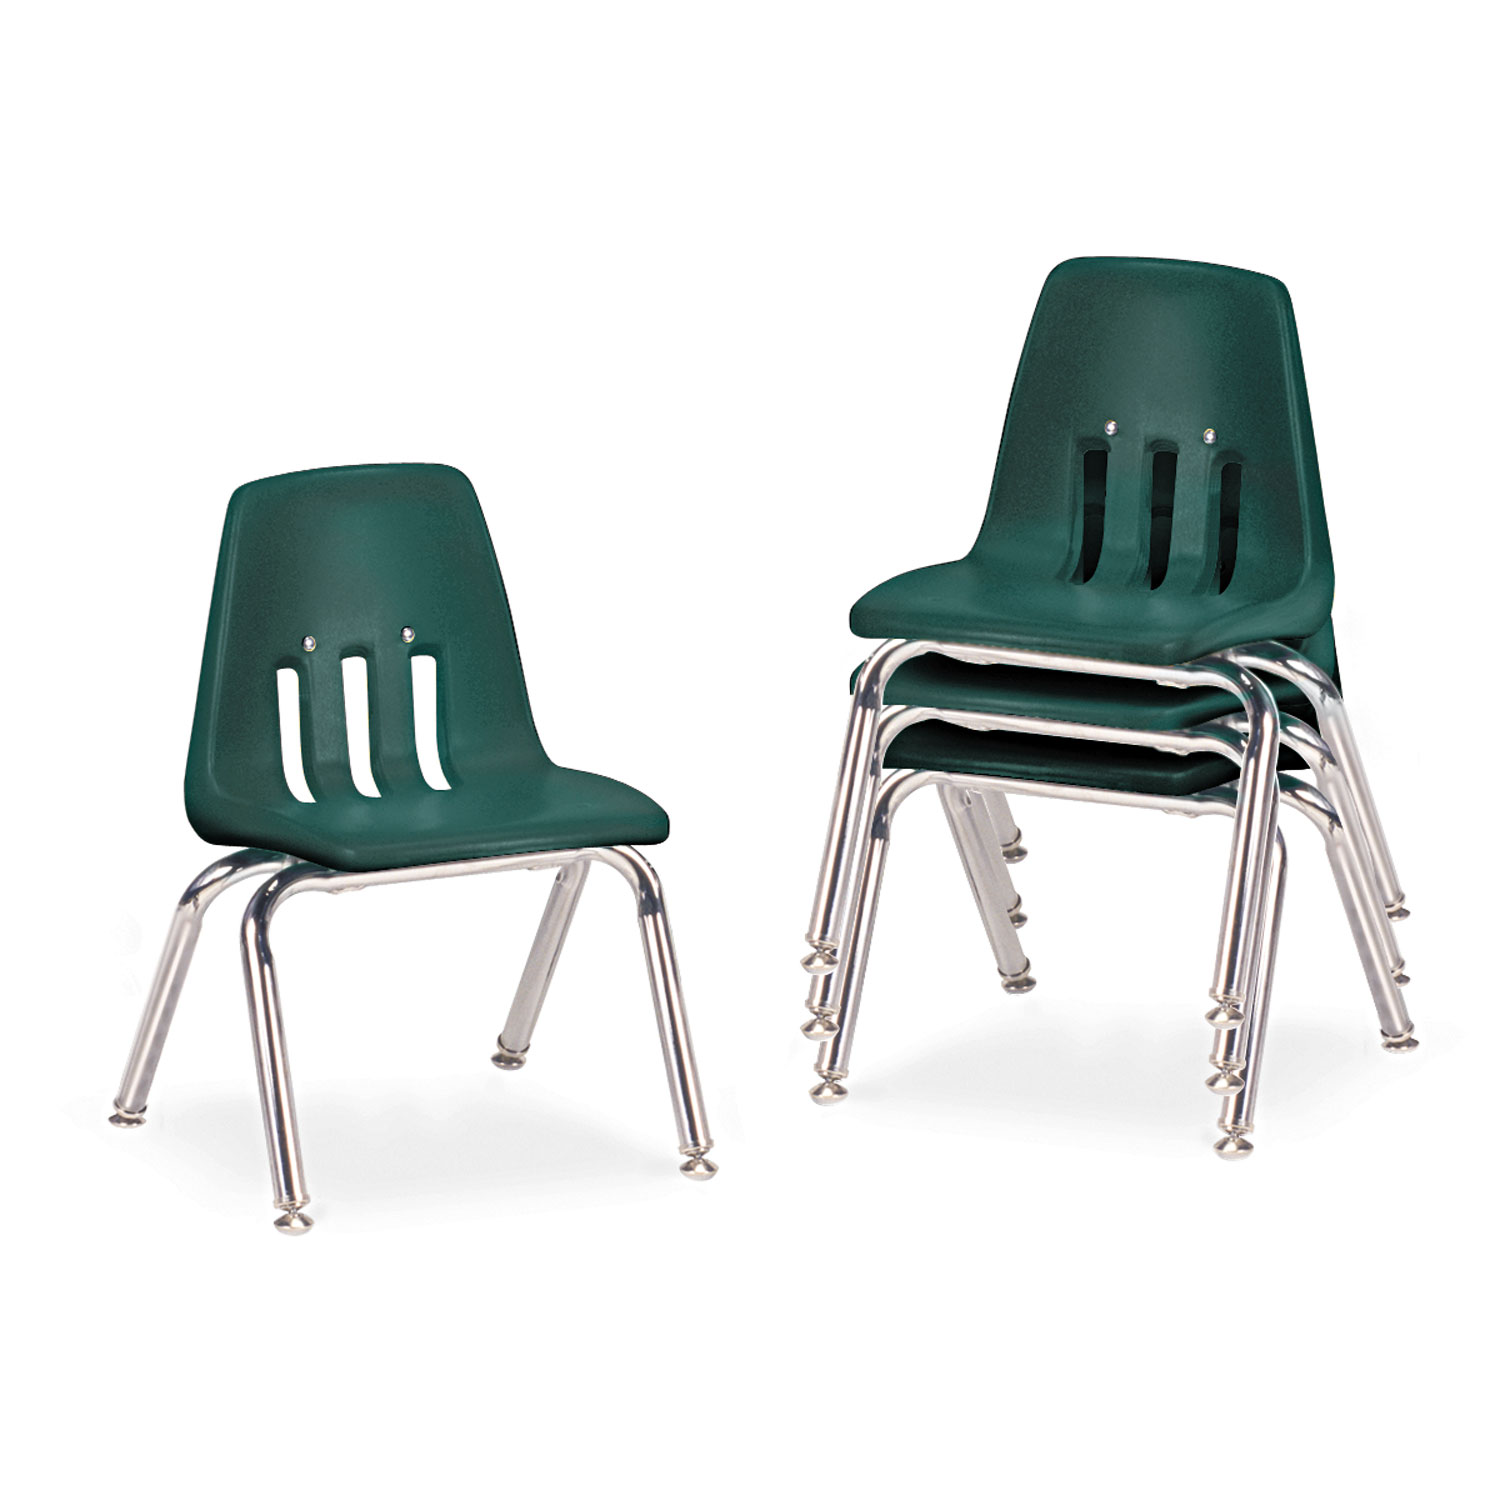 9000 Series Classroom Chairs, 12 Seat Height, Forest Green/Chrome, 4/Carton